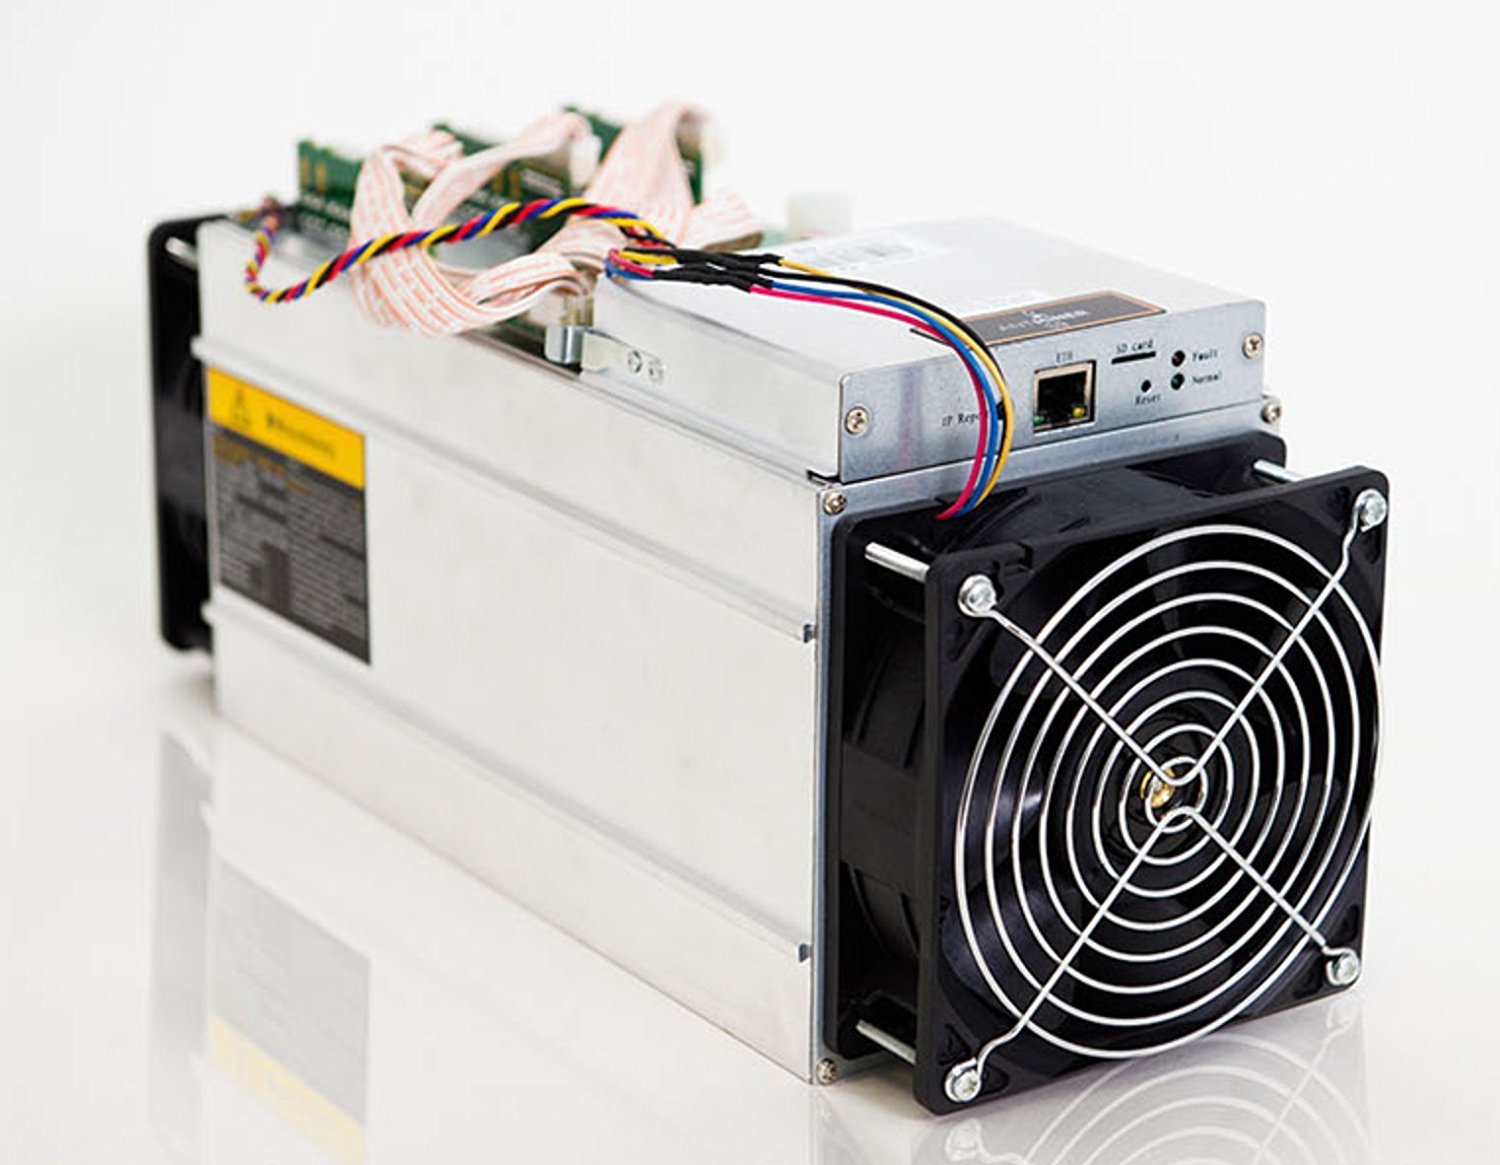 Bitmain Antminer S9 SE 16Th mining profit calculator - WhatToMine